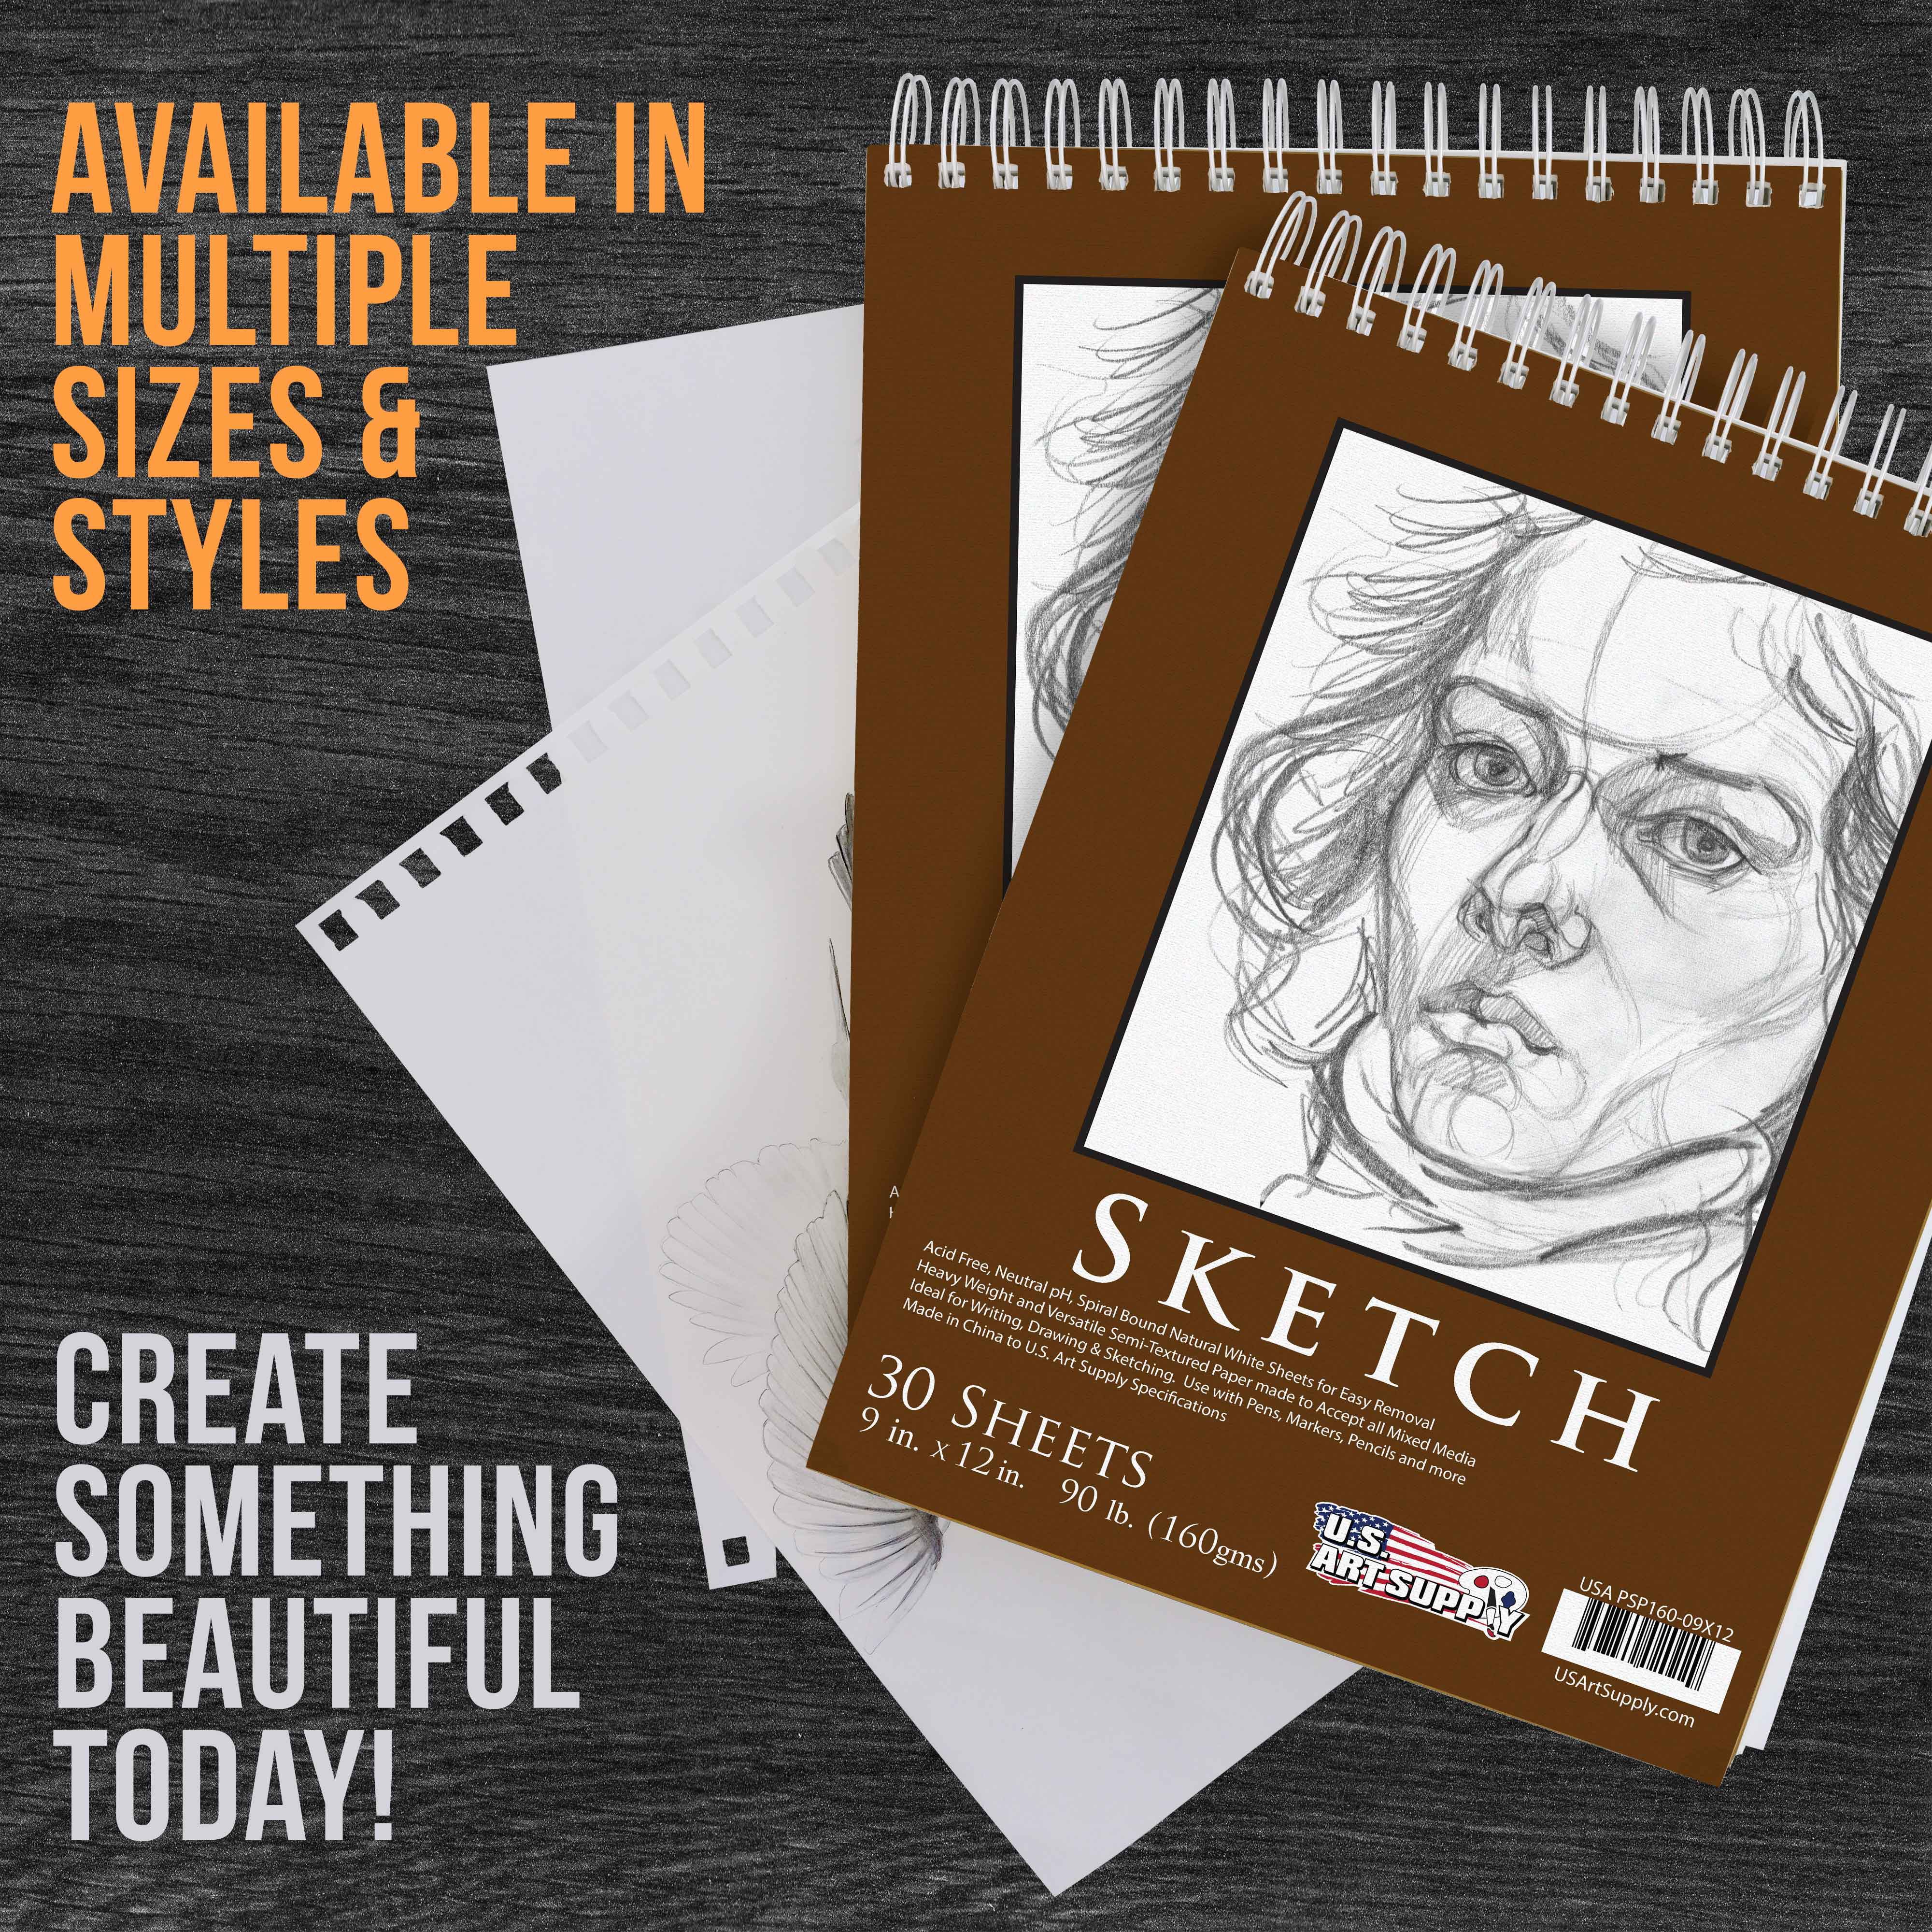 String & Space Artist’s Sketchbook Hardcover – 200gsm Very Thick Paper – Large, Spiral Sketch Book for Drawing and Mixed Media – Sketch Pad, Art Book